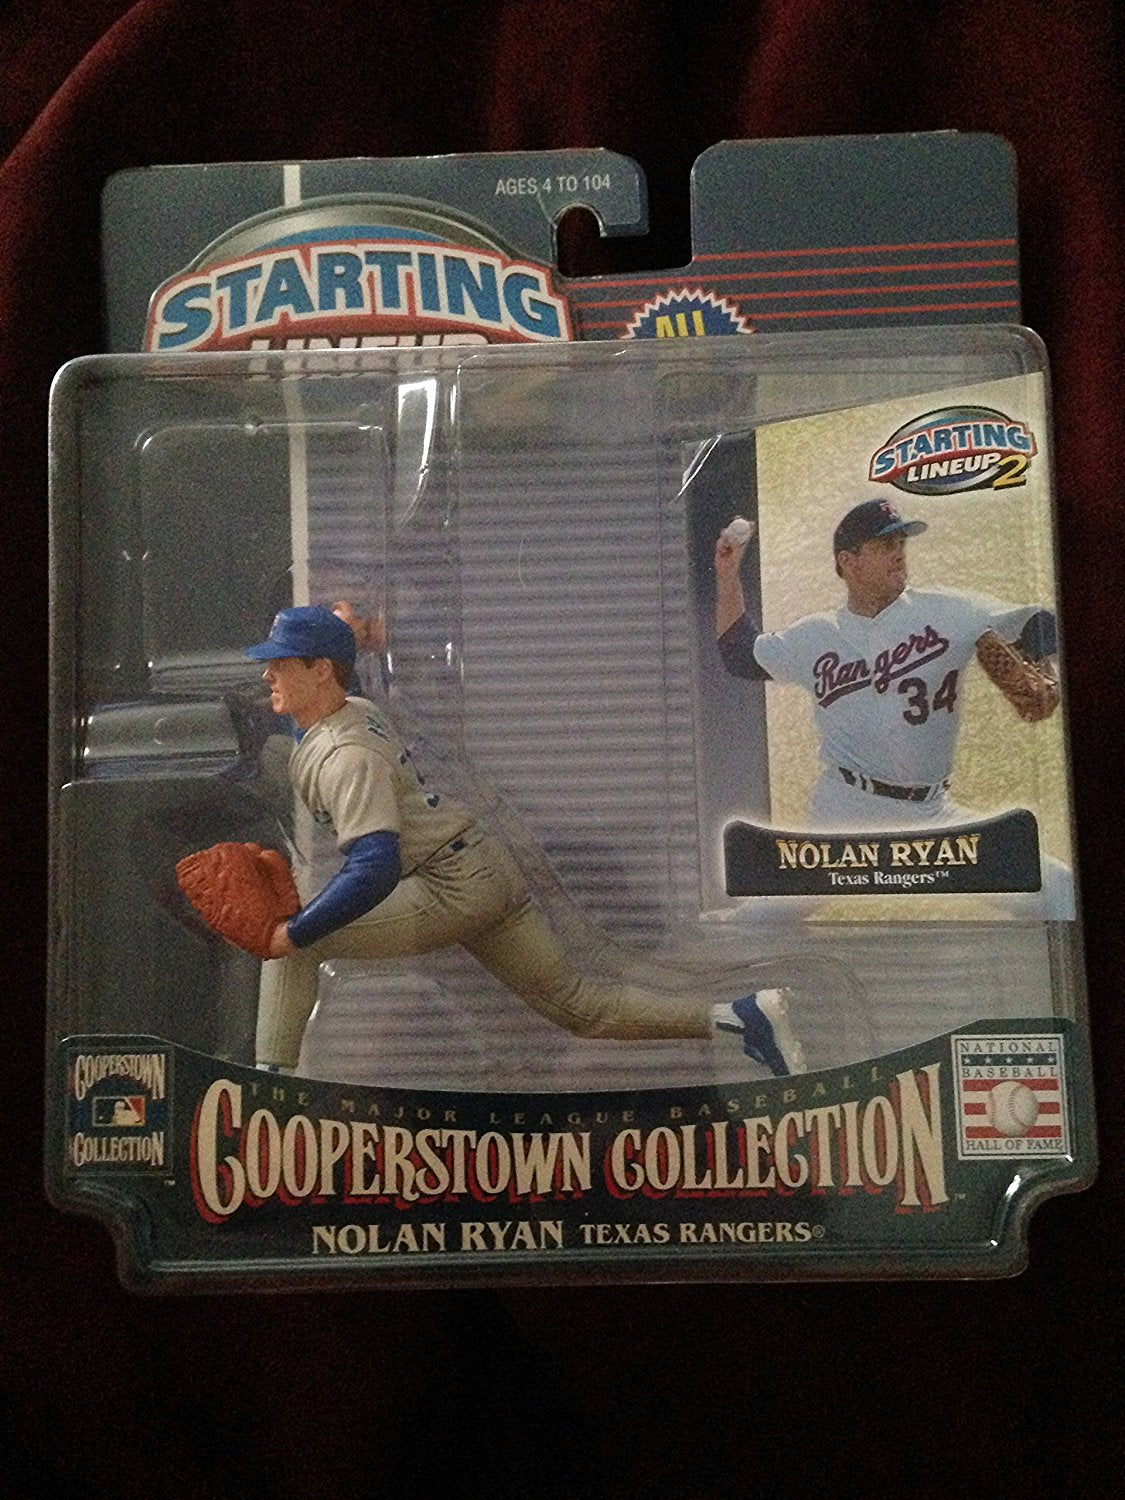 NOLAN RYAN / TEXAS RANGERS 2001 MLB Cooperstown Collection Starting Lineup 2 Action Figure & Exclusive Trading Card